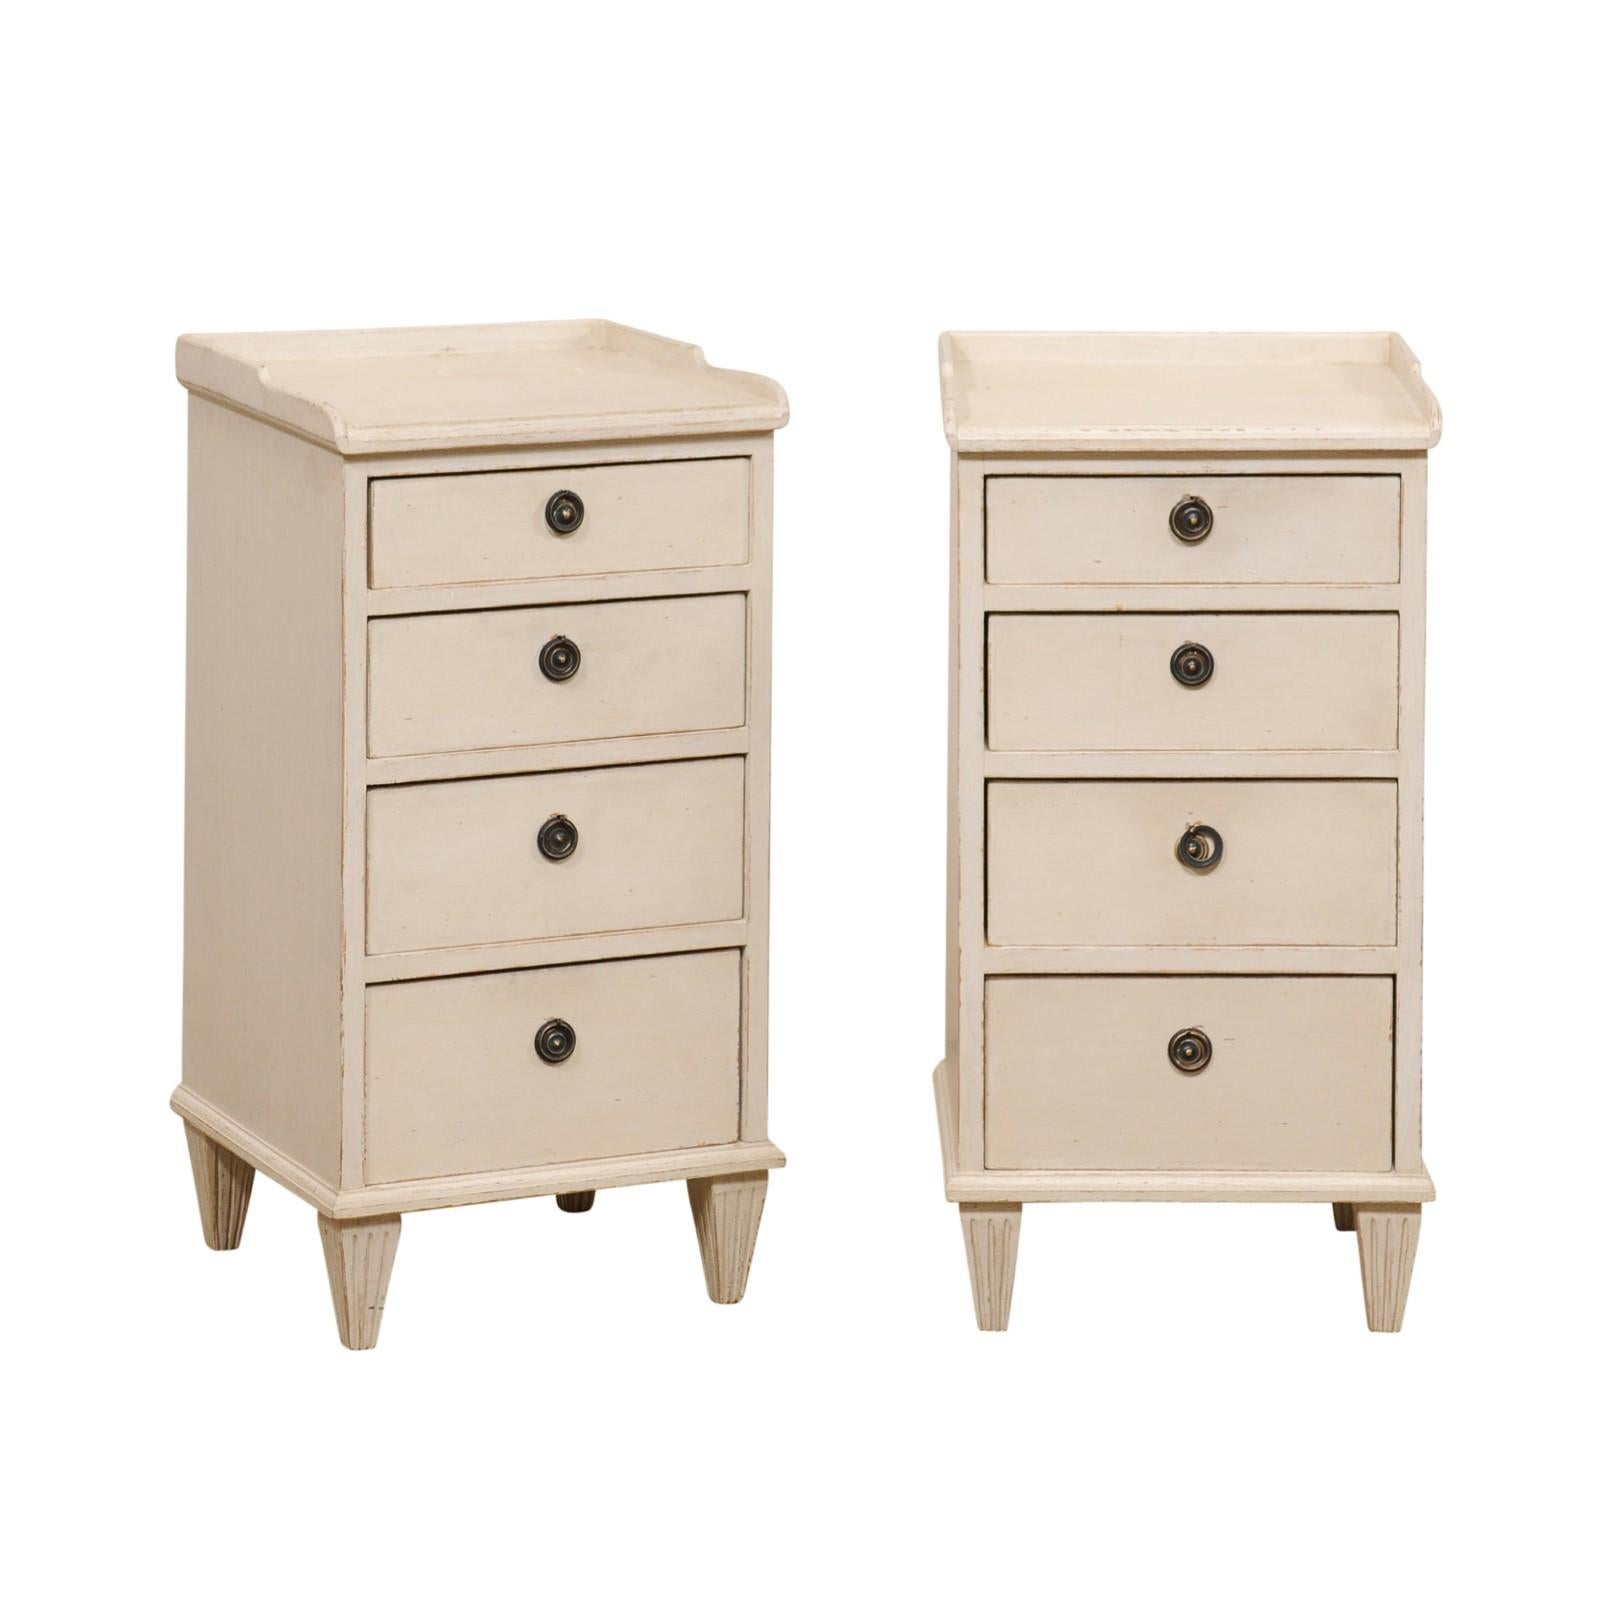 A Swedish pair of painted wood four-drawer side chests, designed in Gustavian style. This vintage pair of petite chests from Sweden each have a raised lip along the top back and sides, atop a cabinet which houses four graduated drawers, and are